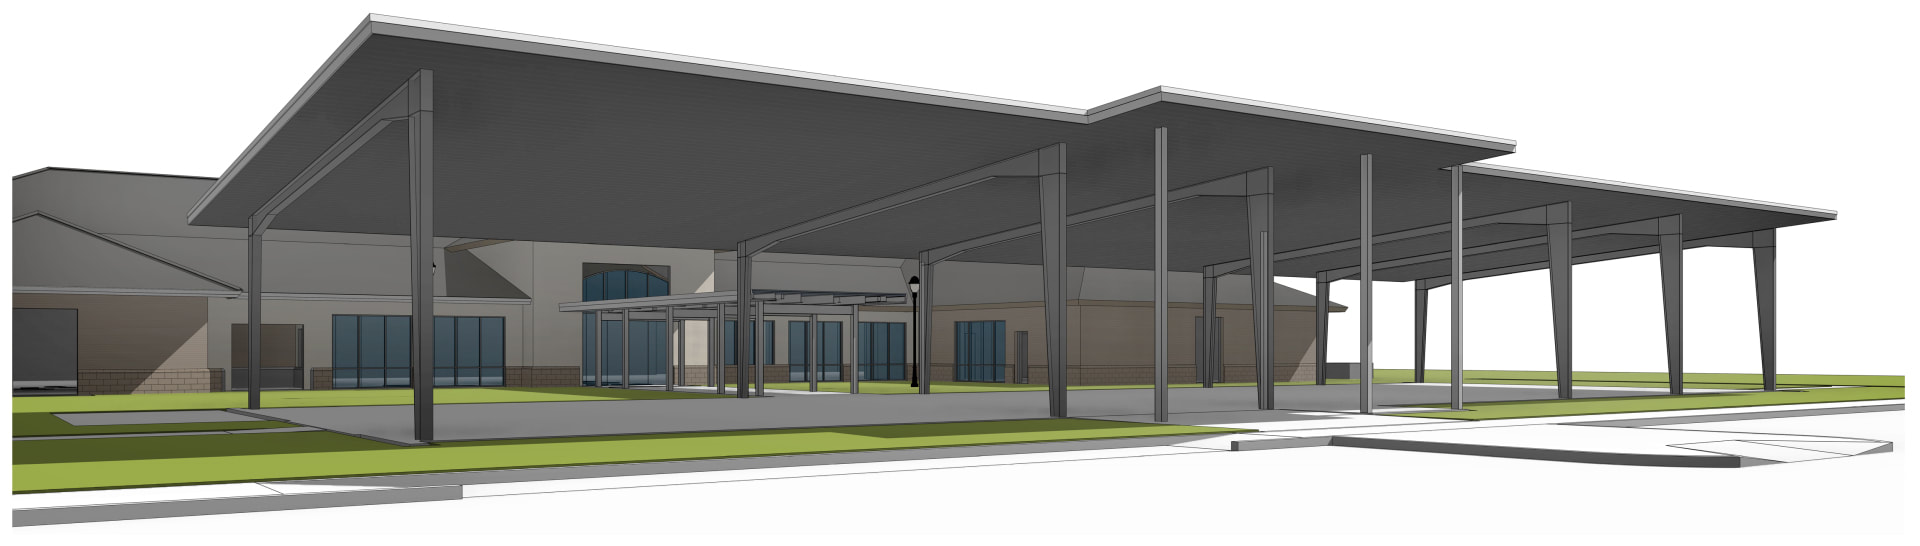 Conceptual rendering of addition to Denham Springs-Walker branch of the Livingston Parish Library. Designed by Cockfield Jackson Architects.